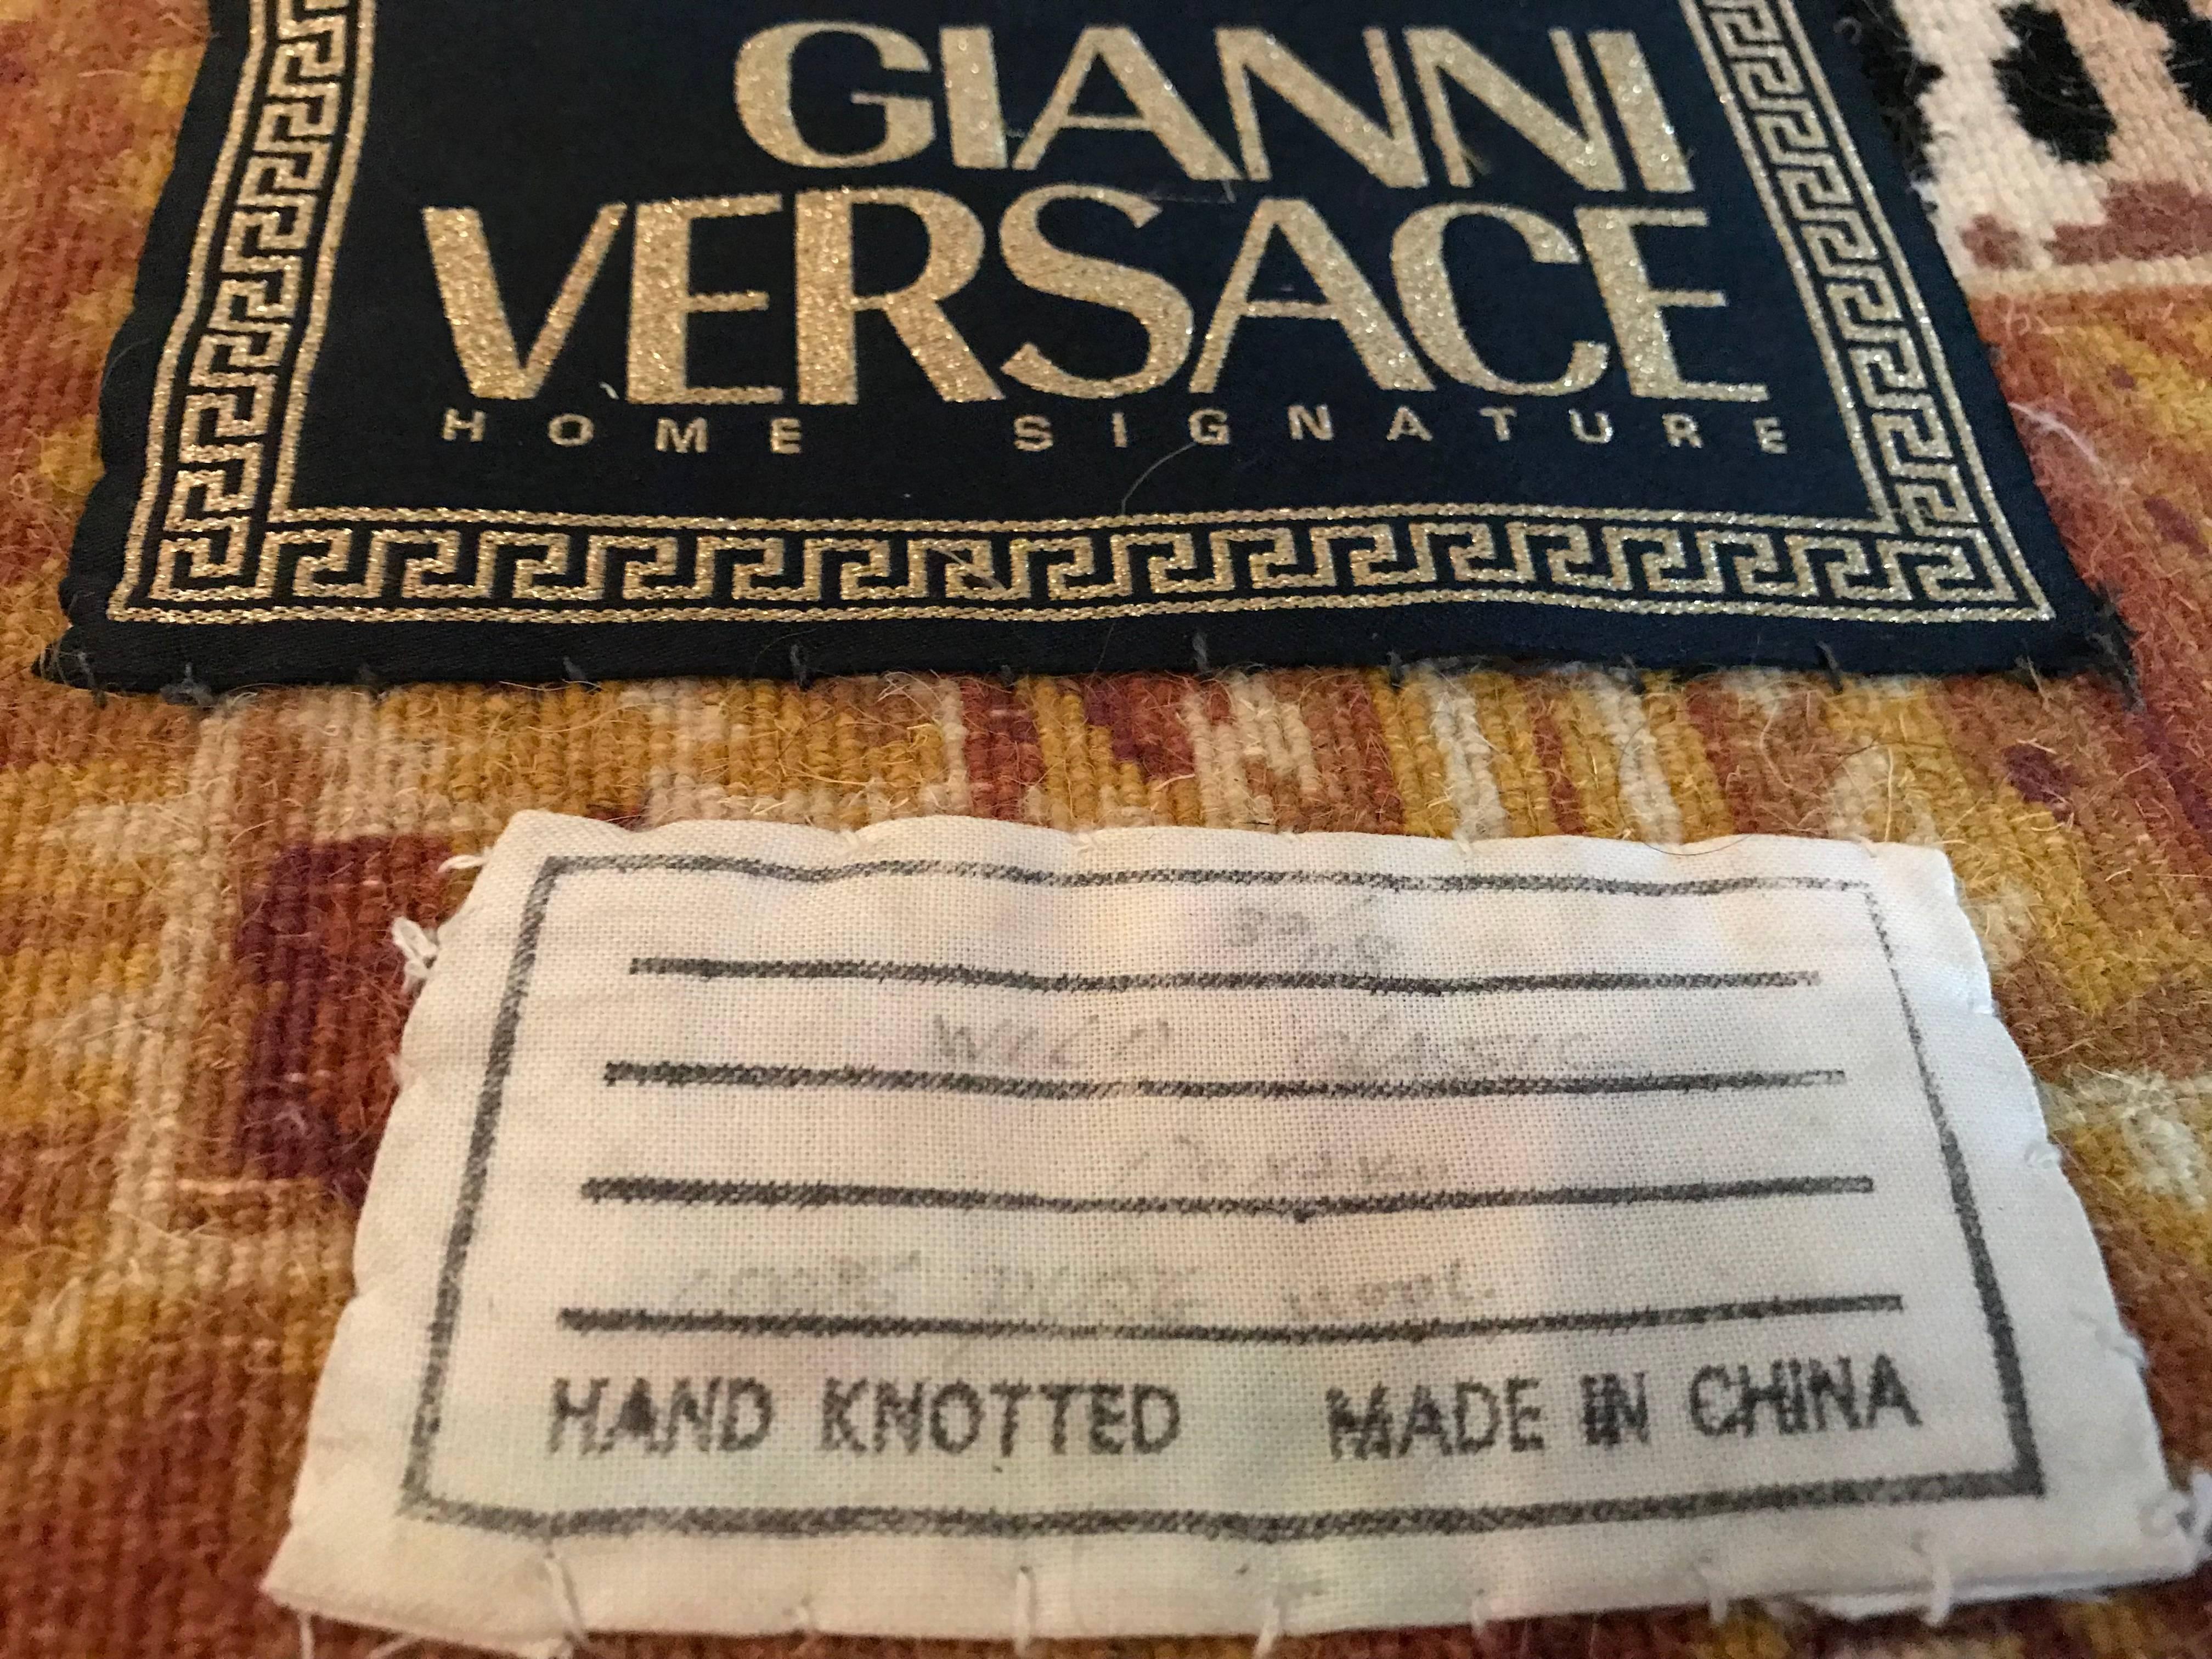 versace rug for sale